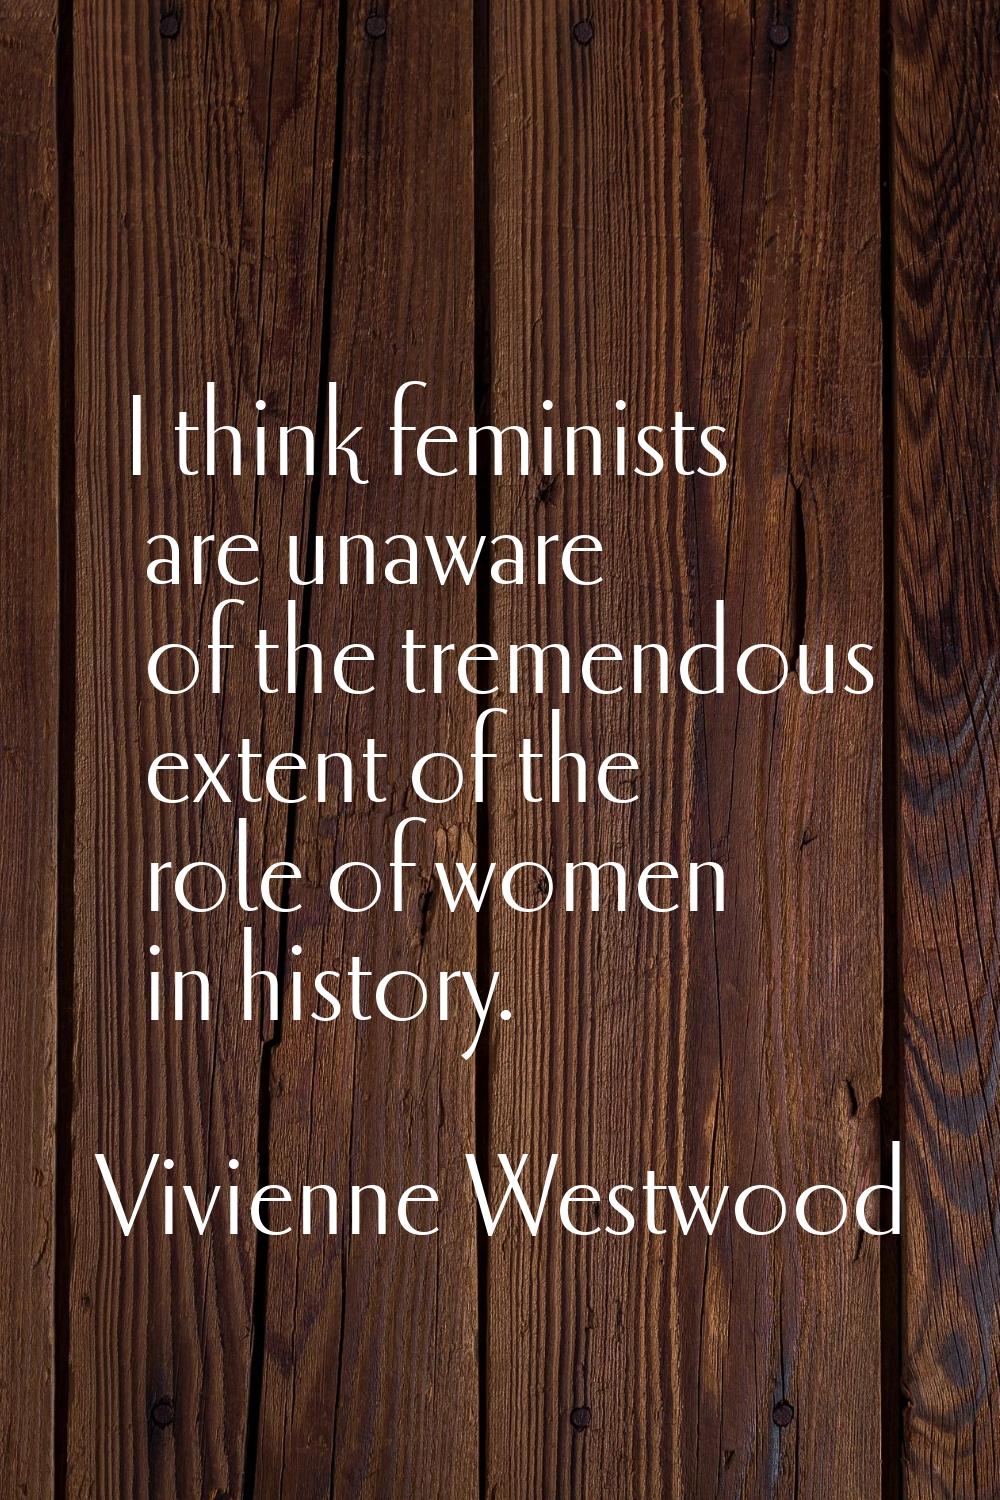 I think feminists are unaware of the tremendous extent of the role of women in history.